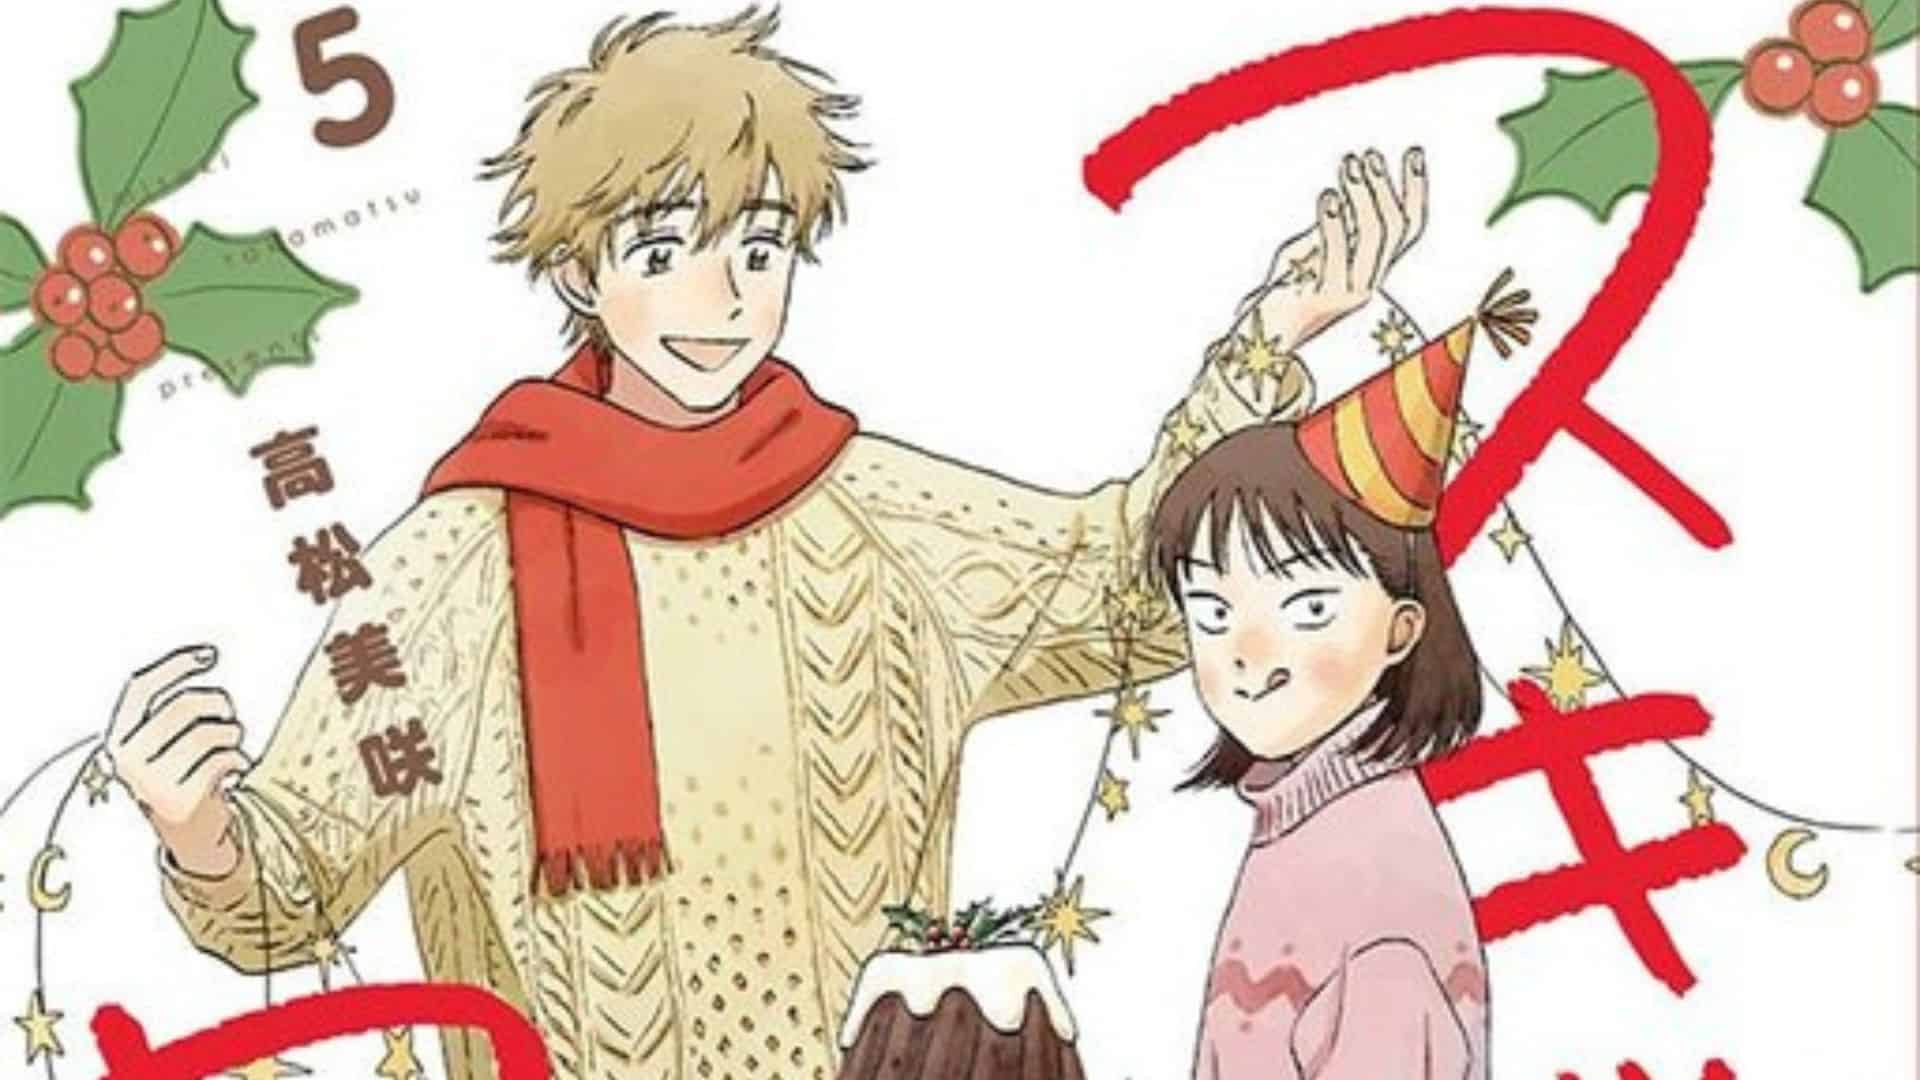 Skip And Loafer Chapter 54 Release Date, Spoilers, and Where to Read? -  Anime Flix Hub - Medium